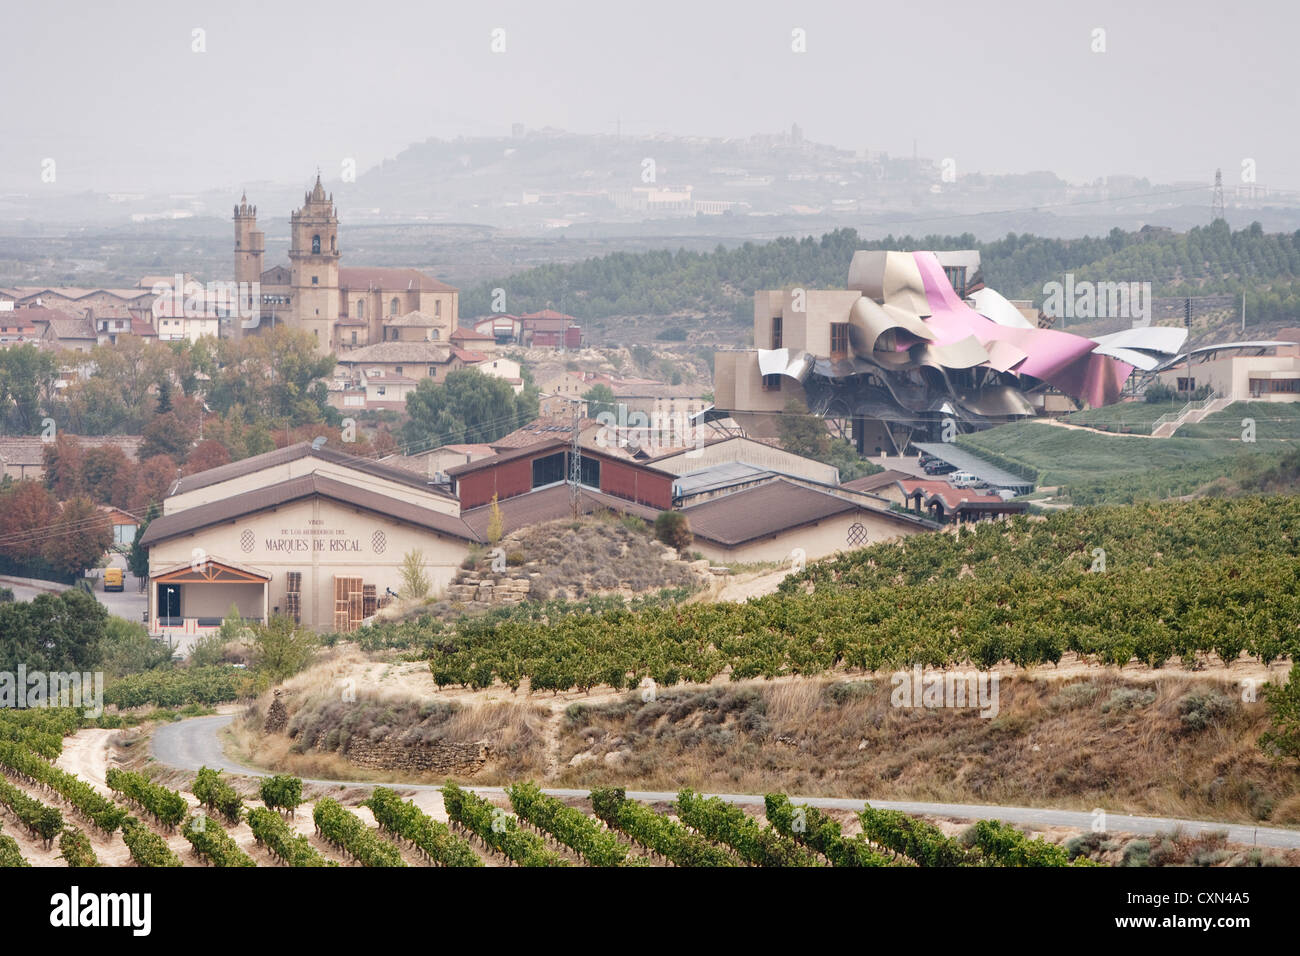 Wineries Marques de Riscal, hotel (designed by Frank Gehry ) and church at El Ciego, Rioja Alavesa, Alava, Spain Stock Photo